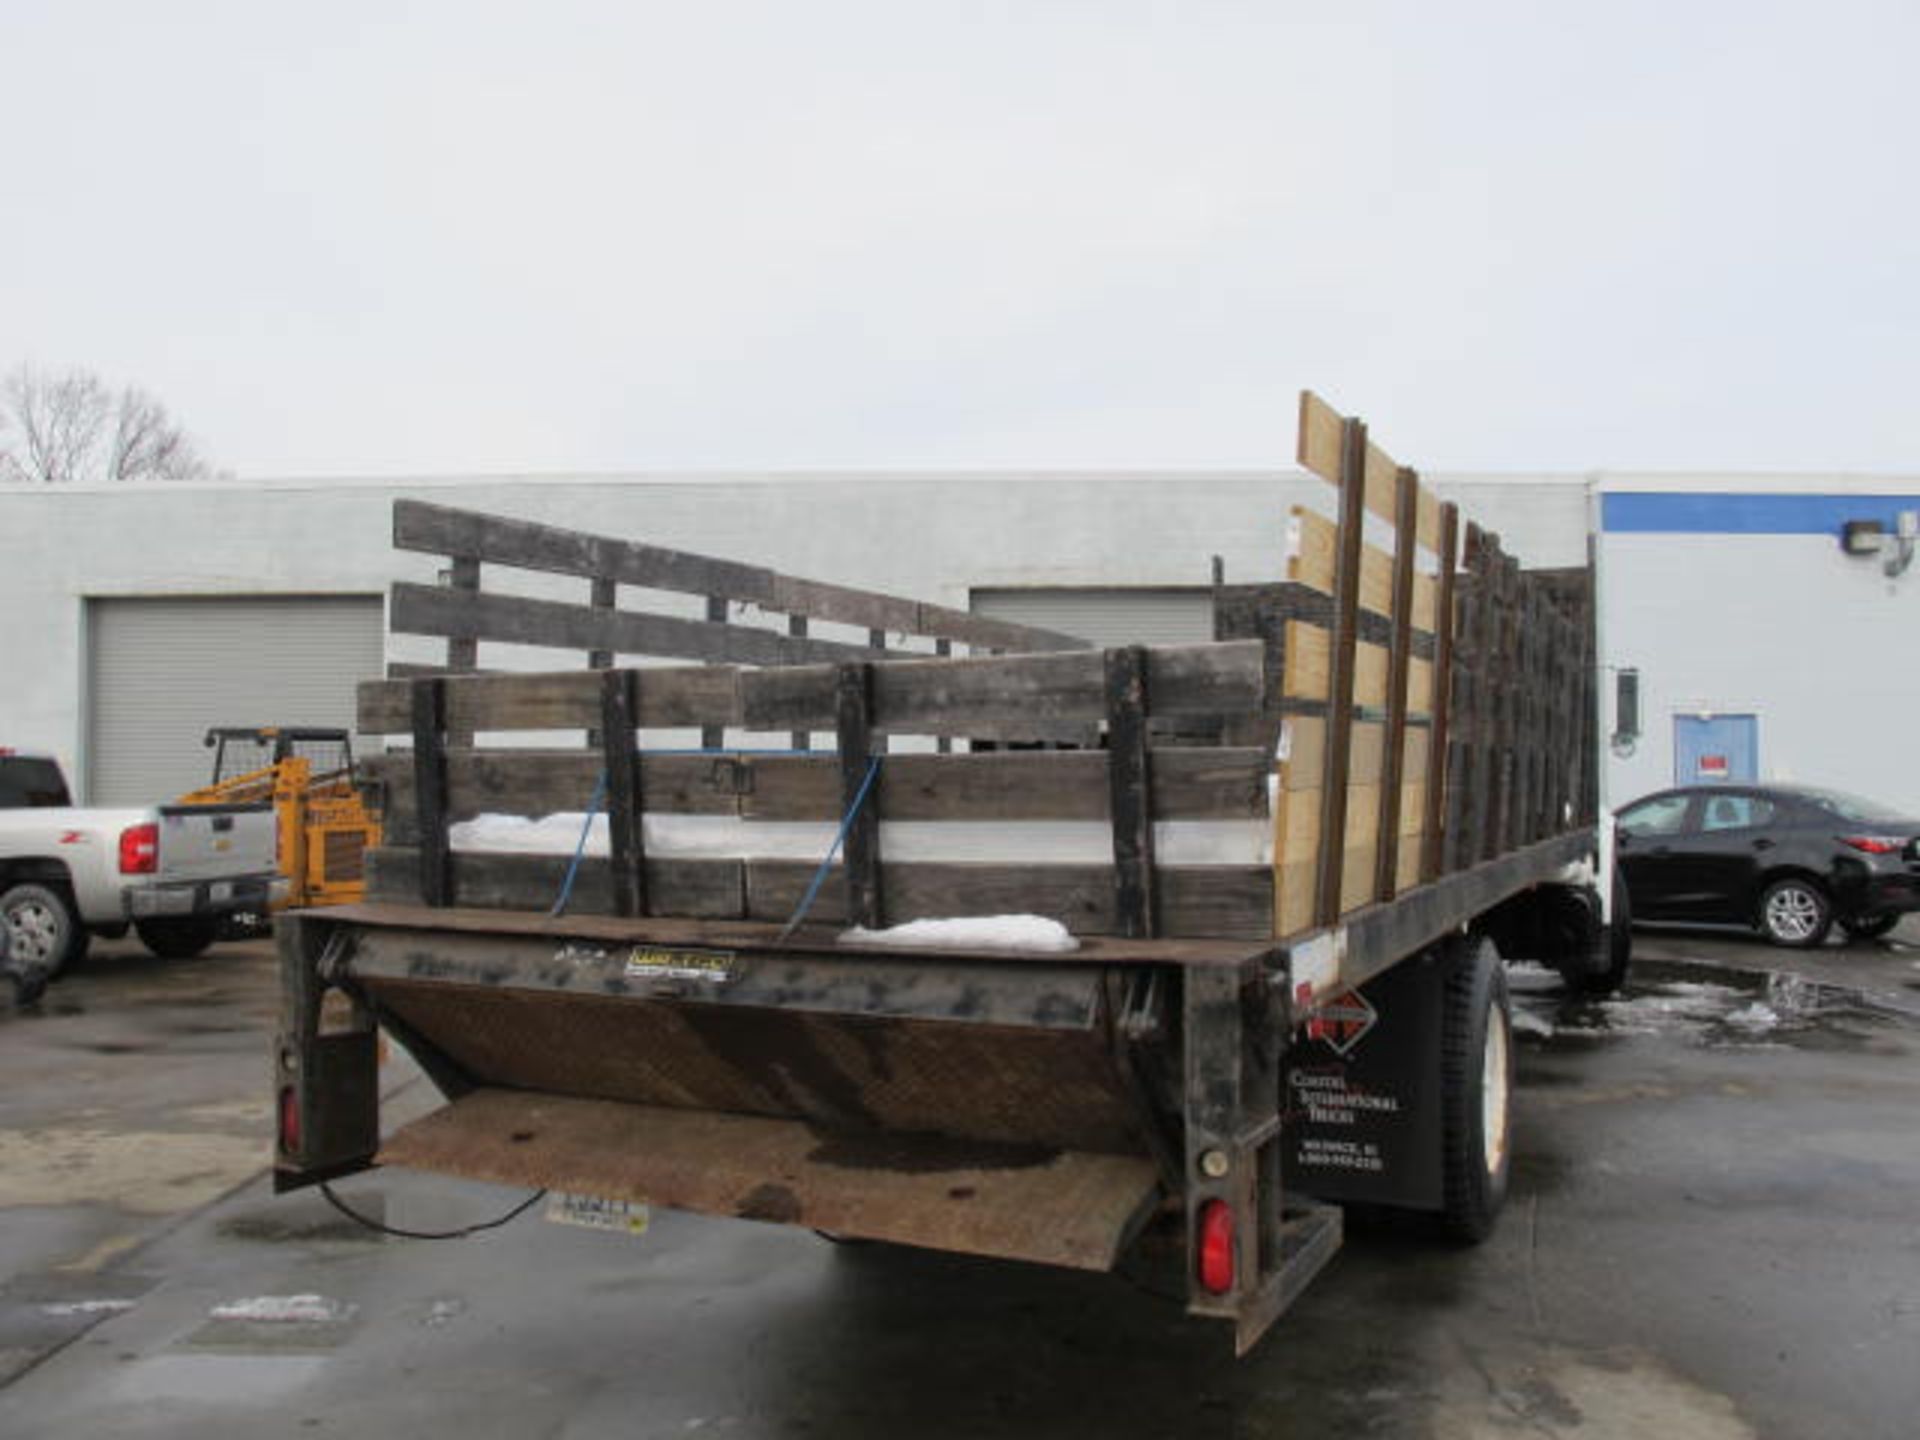 1998 International 4900 DT466E 4x2 Stake Body Truck VIN: 1HTSCAAN2W510458 6+ Plus Transmission, - Image 6 of 9